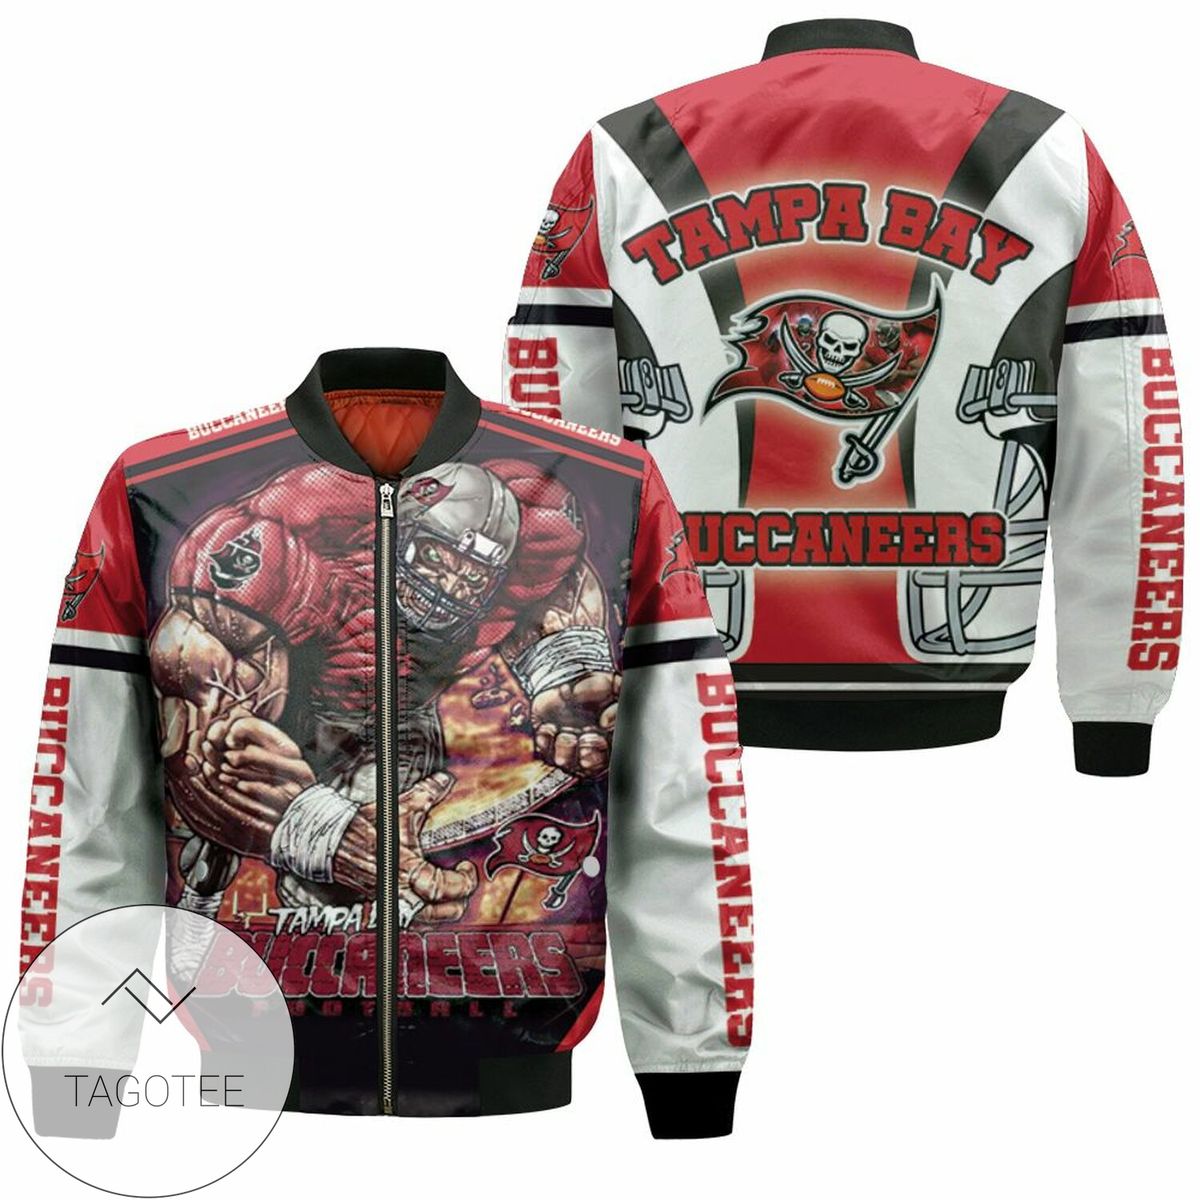 Tampa Bay Buccaneers Football Giant Player Nfc South Division Champions Super Bowl 2021 Bomber Jacket